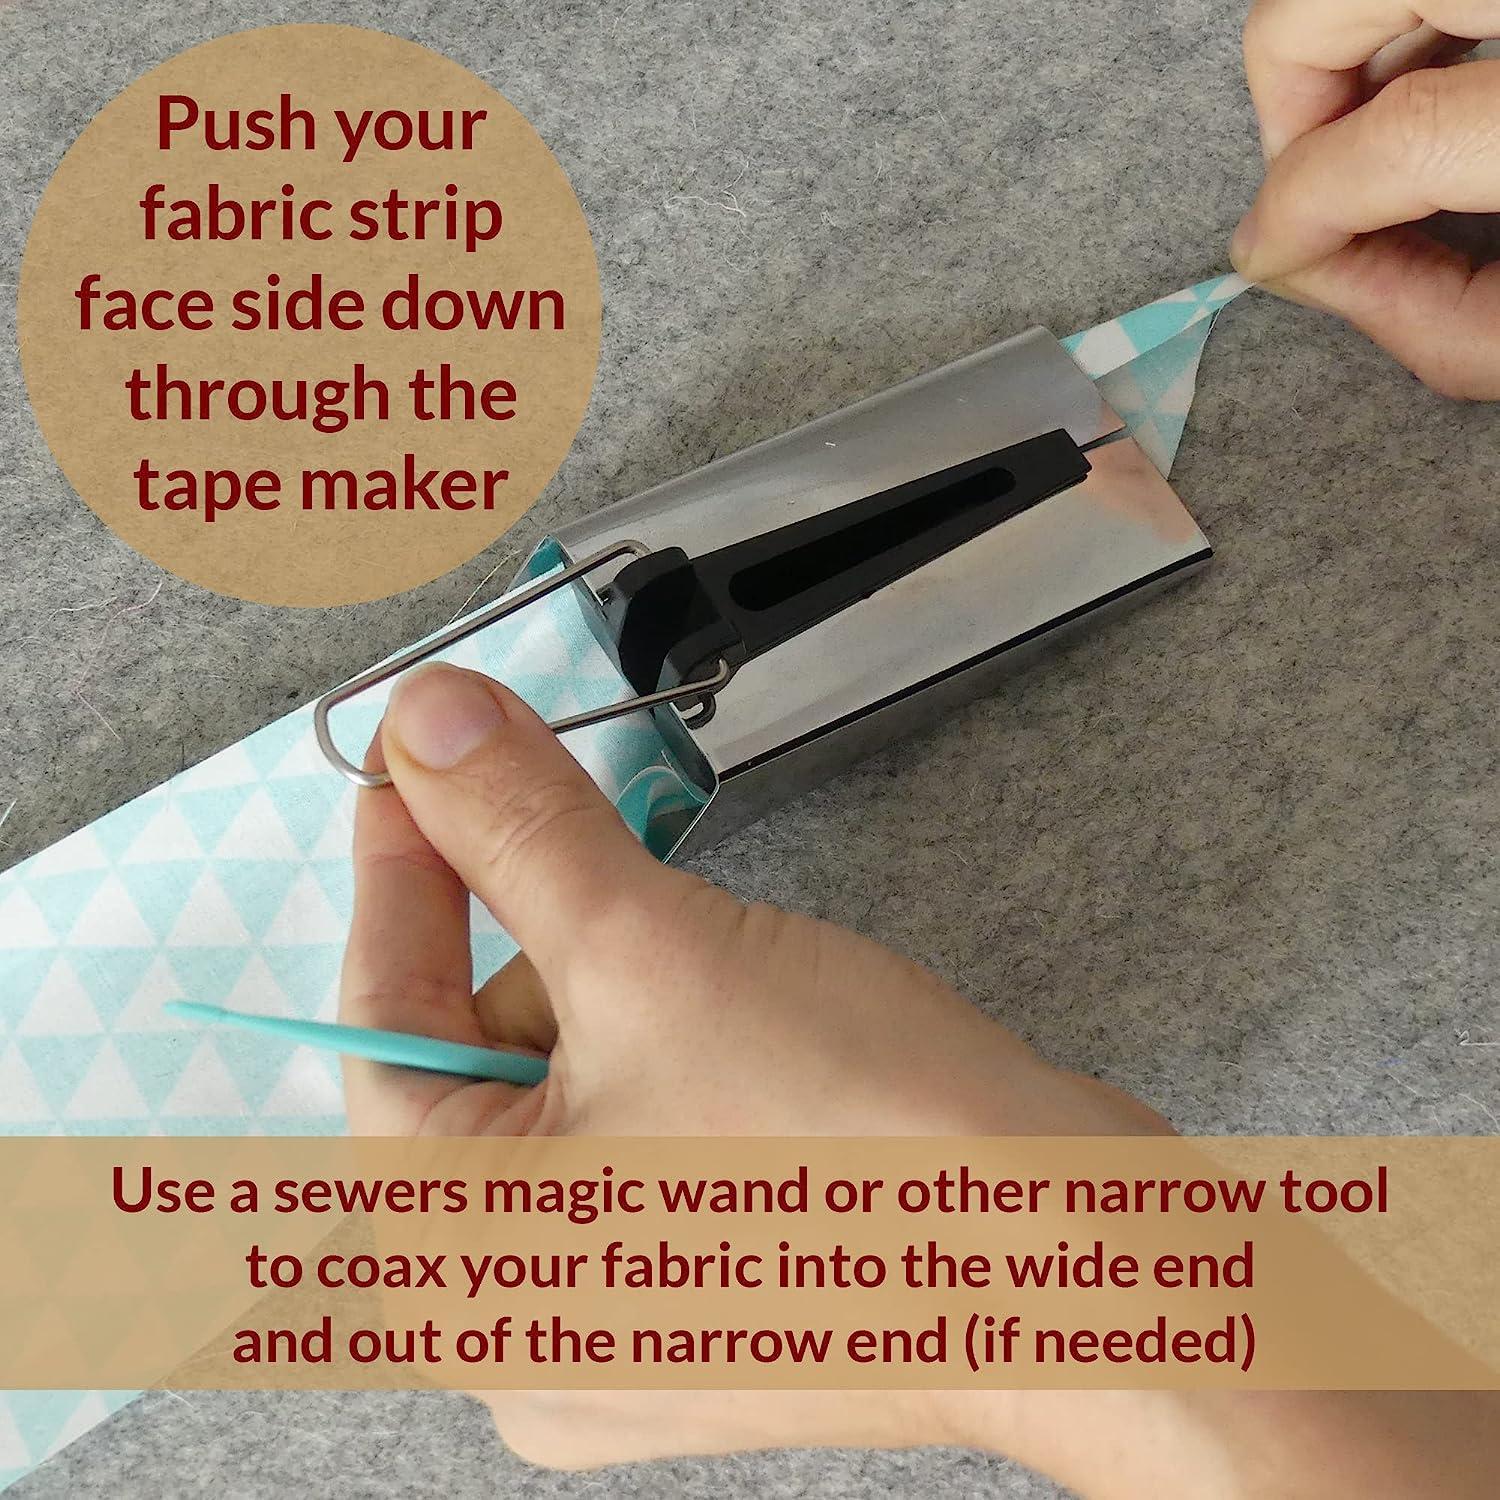 XL Bias Tape Maker - Use for 1” Double Folded Quilt Binding